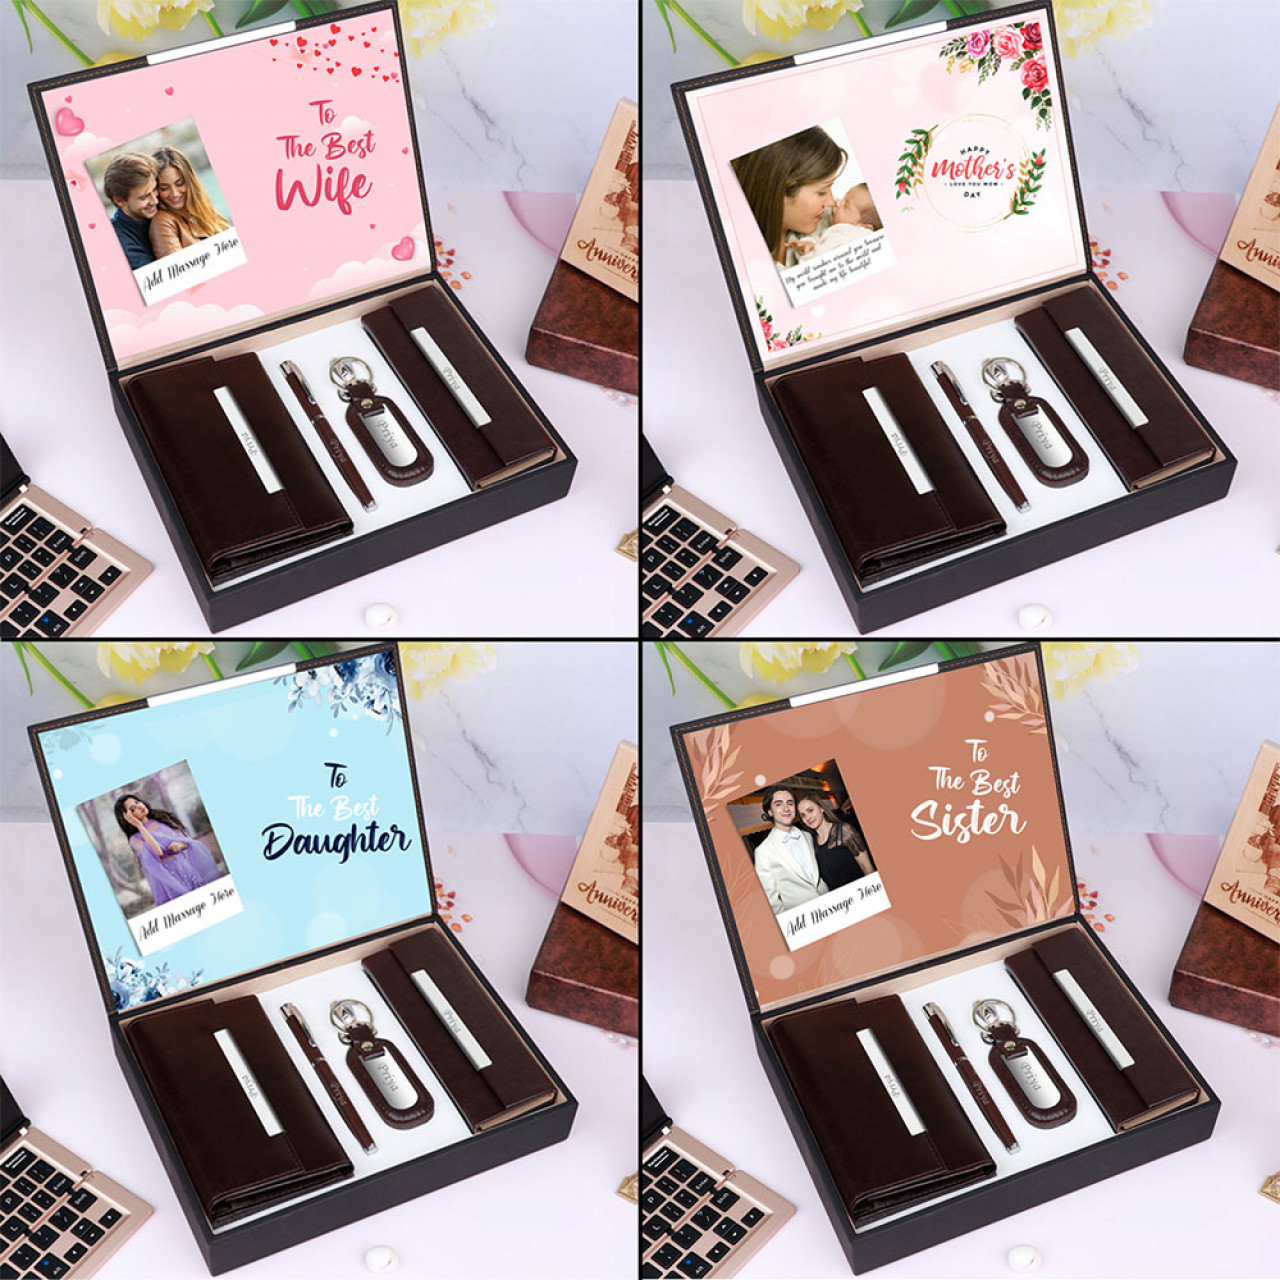 Personalized Multi-Utility Gift Set For Women